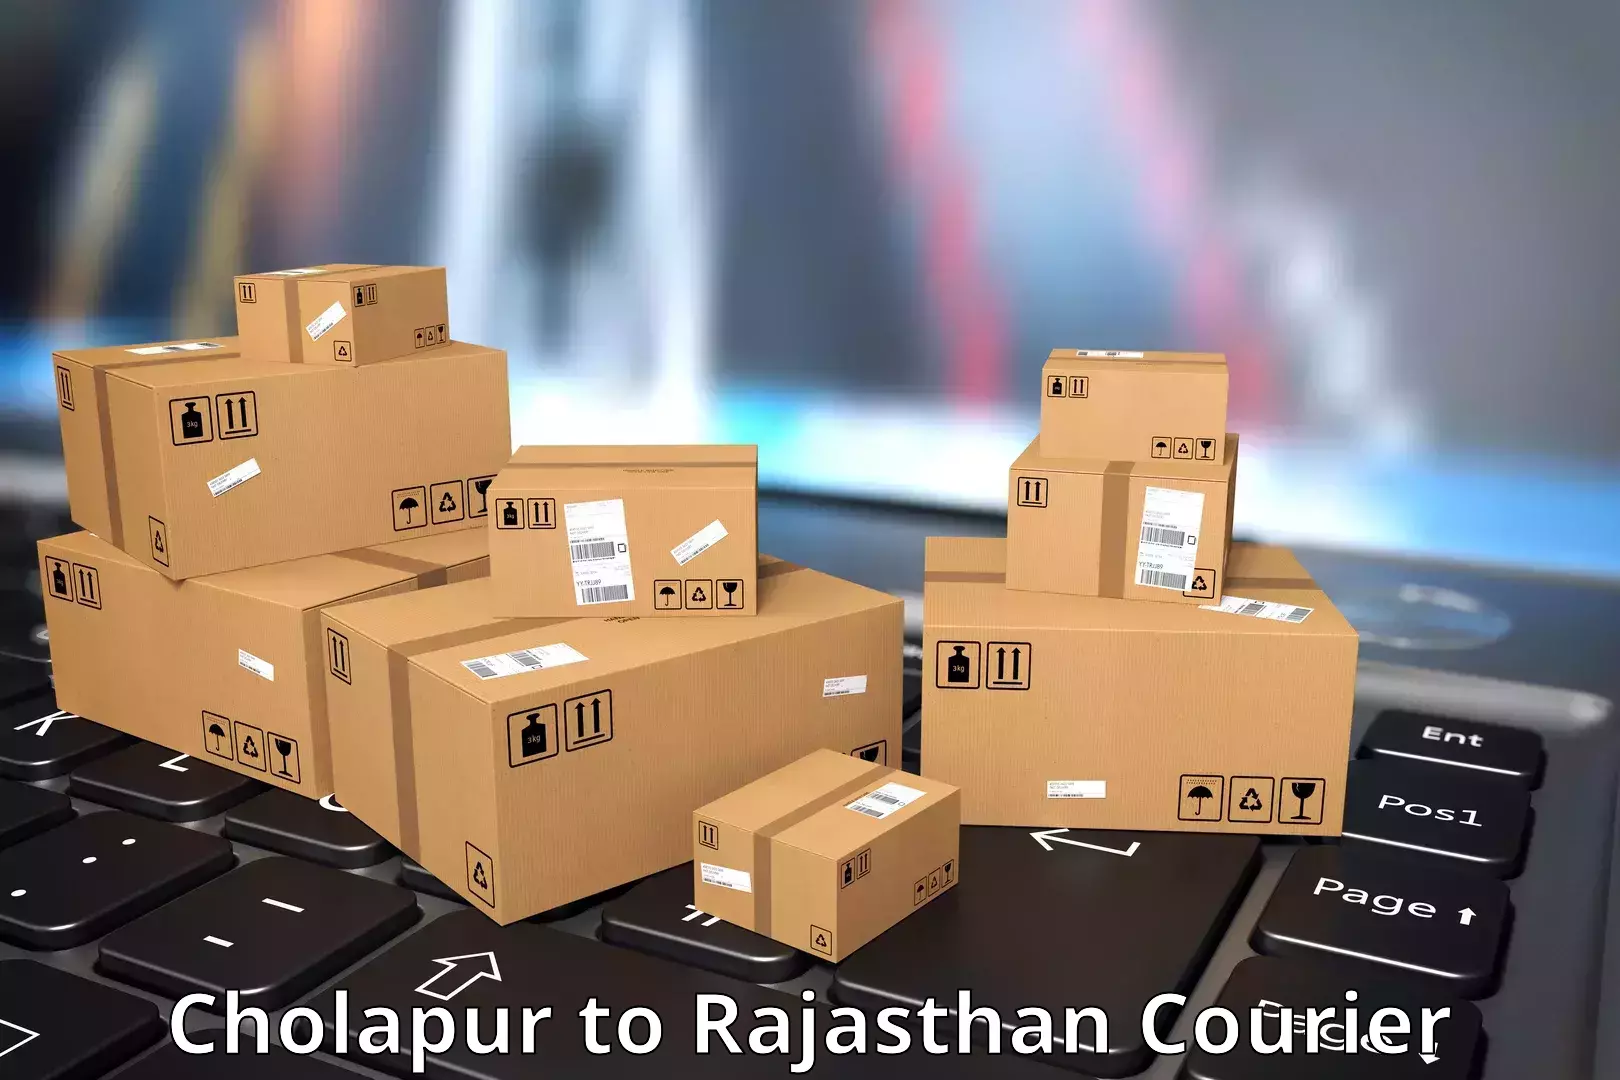 Courier service innovation Cholapur to Rajasthan